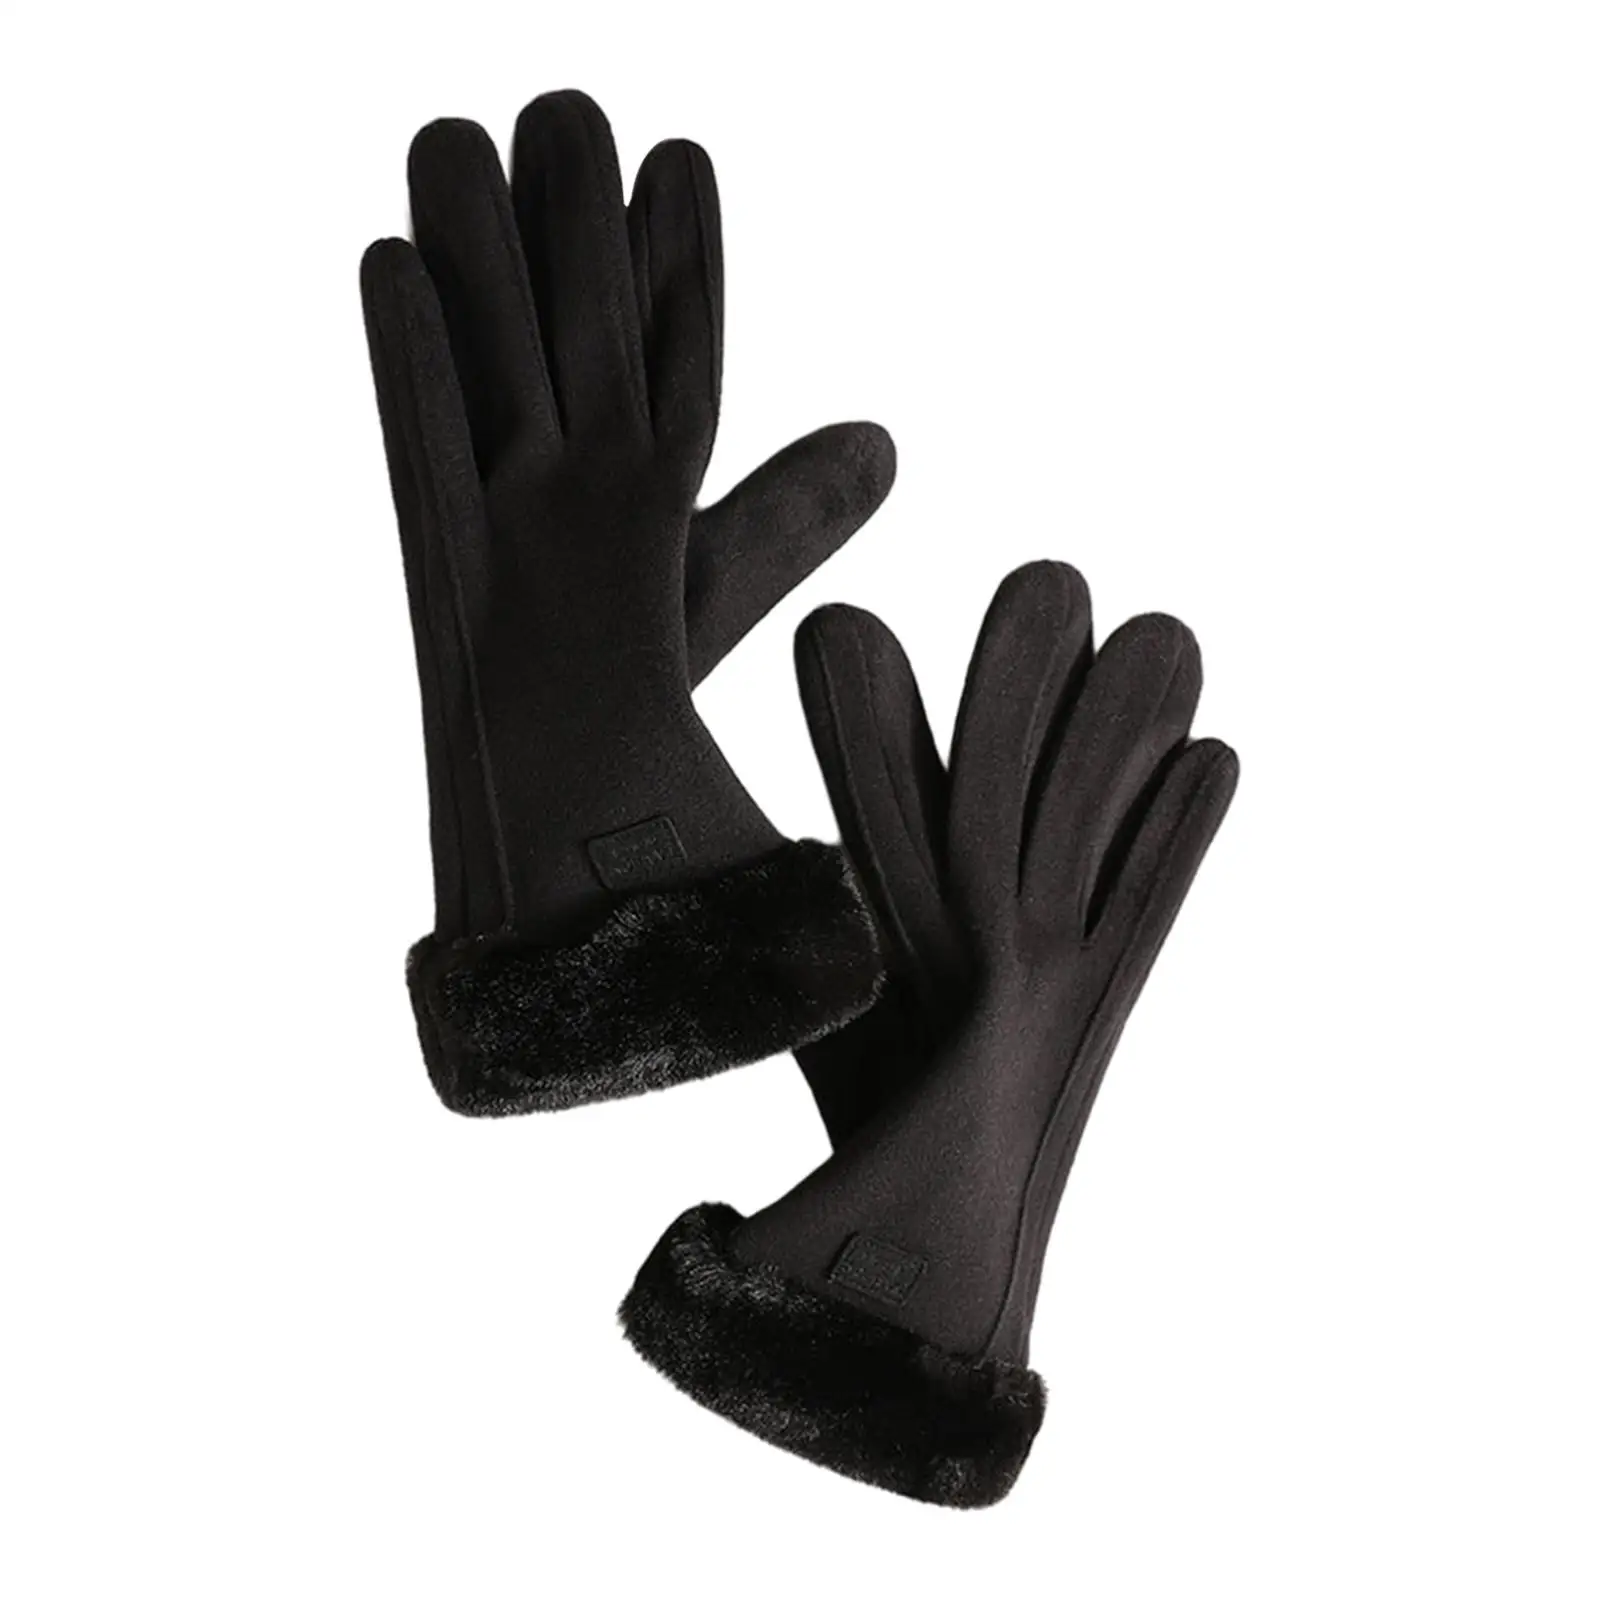 Warm Gloves Warm Simple Touch Screen Windproof for Climbing Outdoor Driving